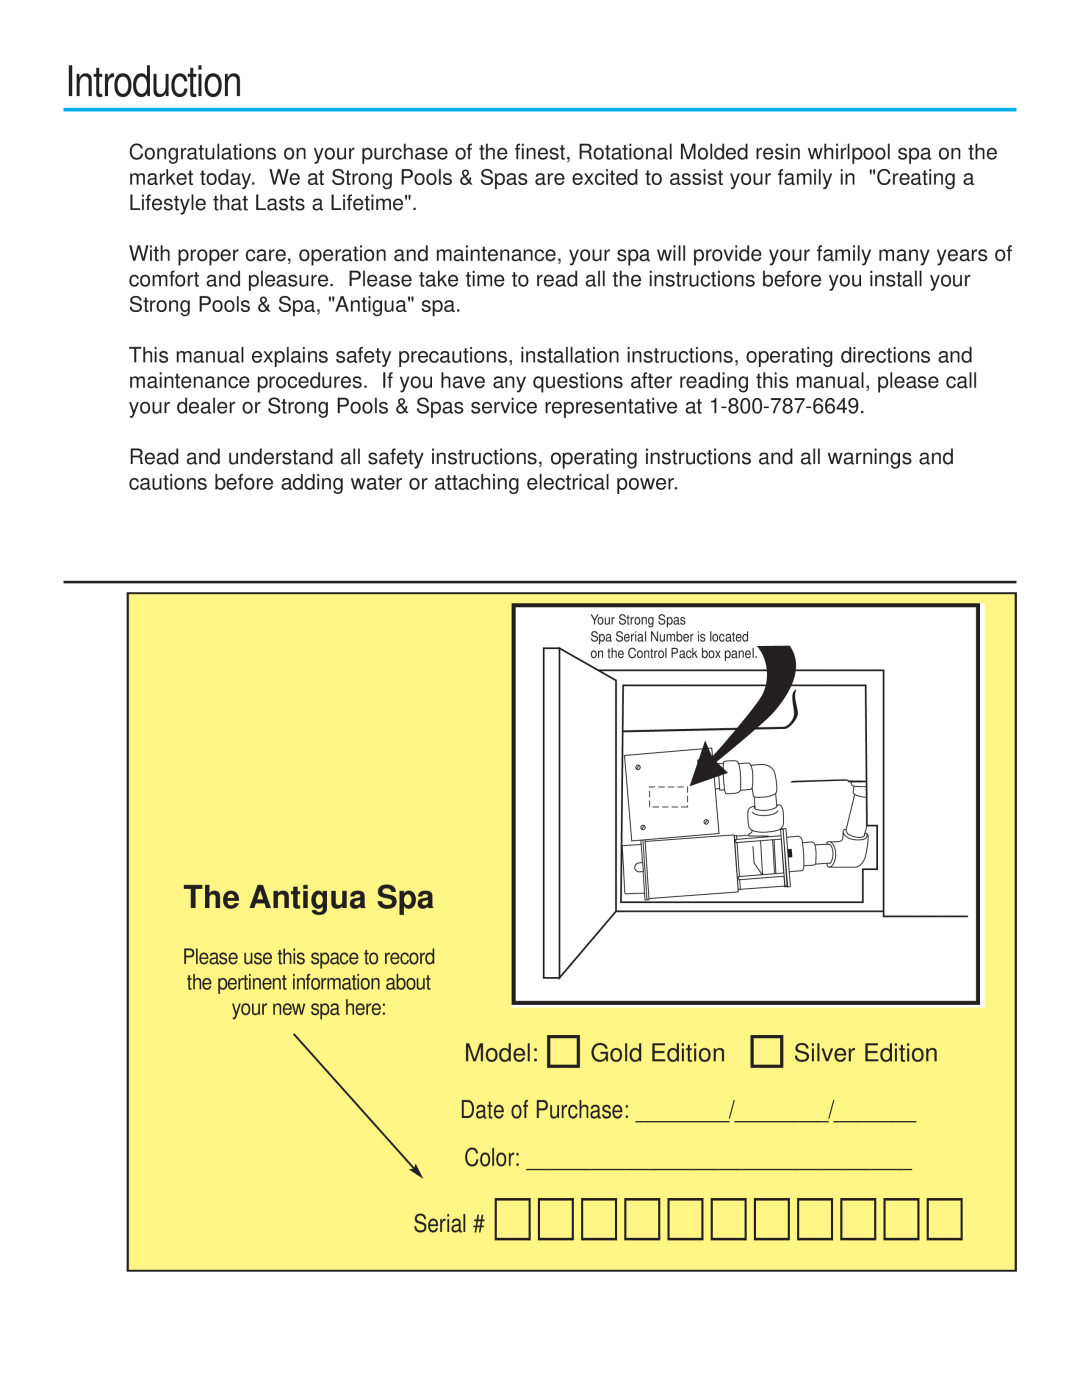 Strong Pools and Spas Strong Spas The Antigua owner manual Introduction, The Antigua Spa, Model Gold Edition Silver Edition 